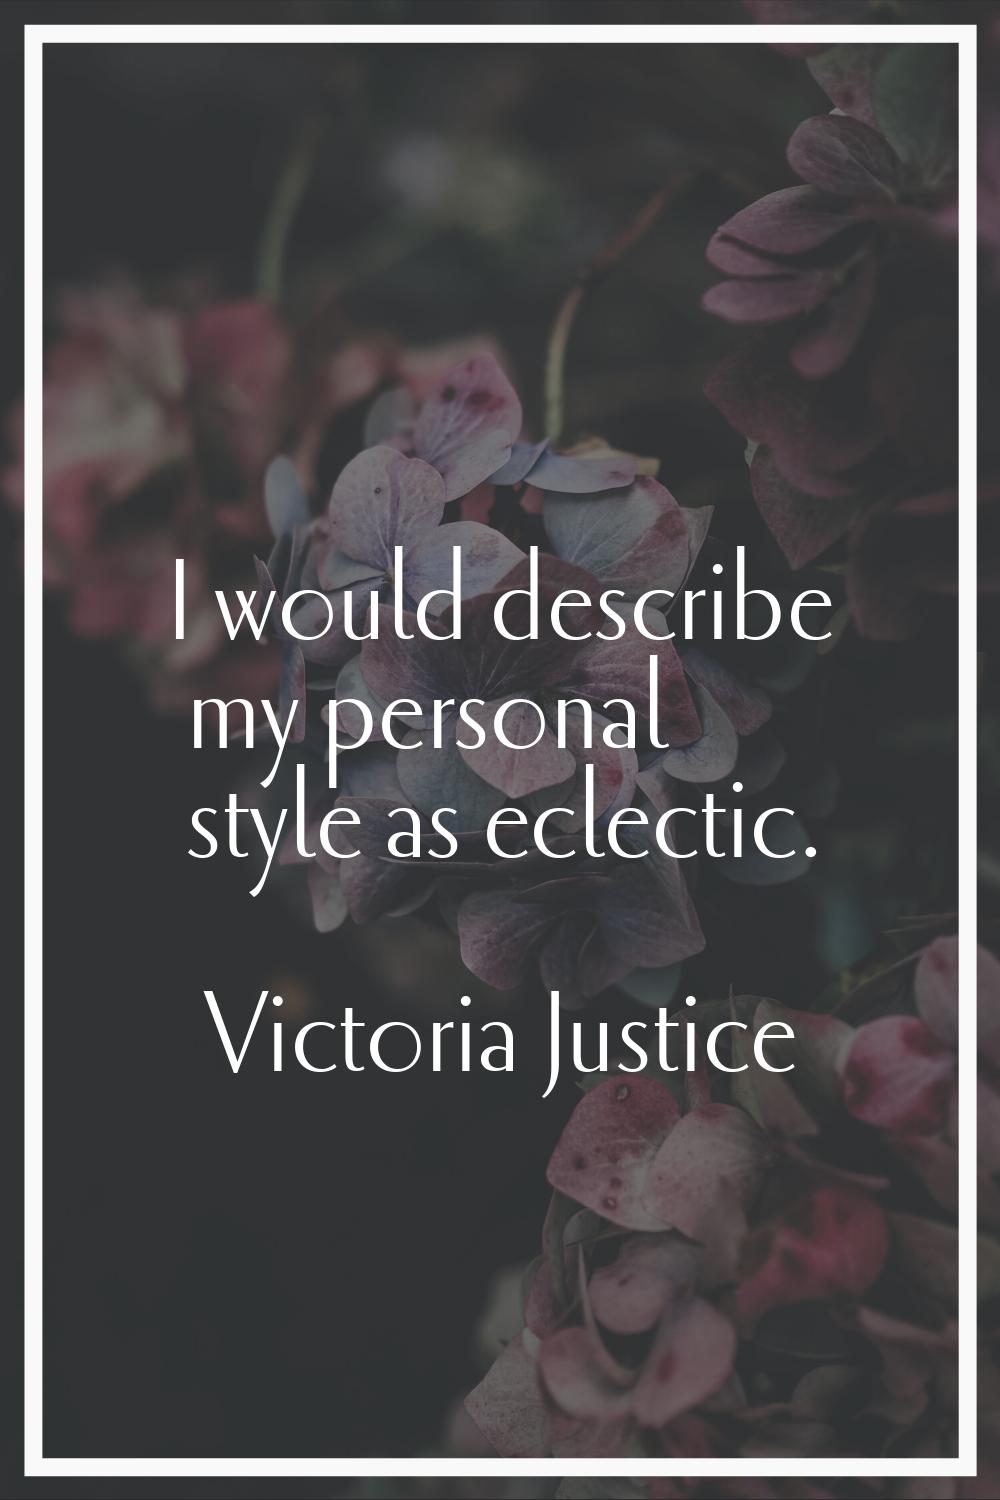 I would describe my personal style as eclectic.